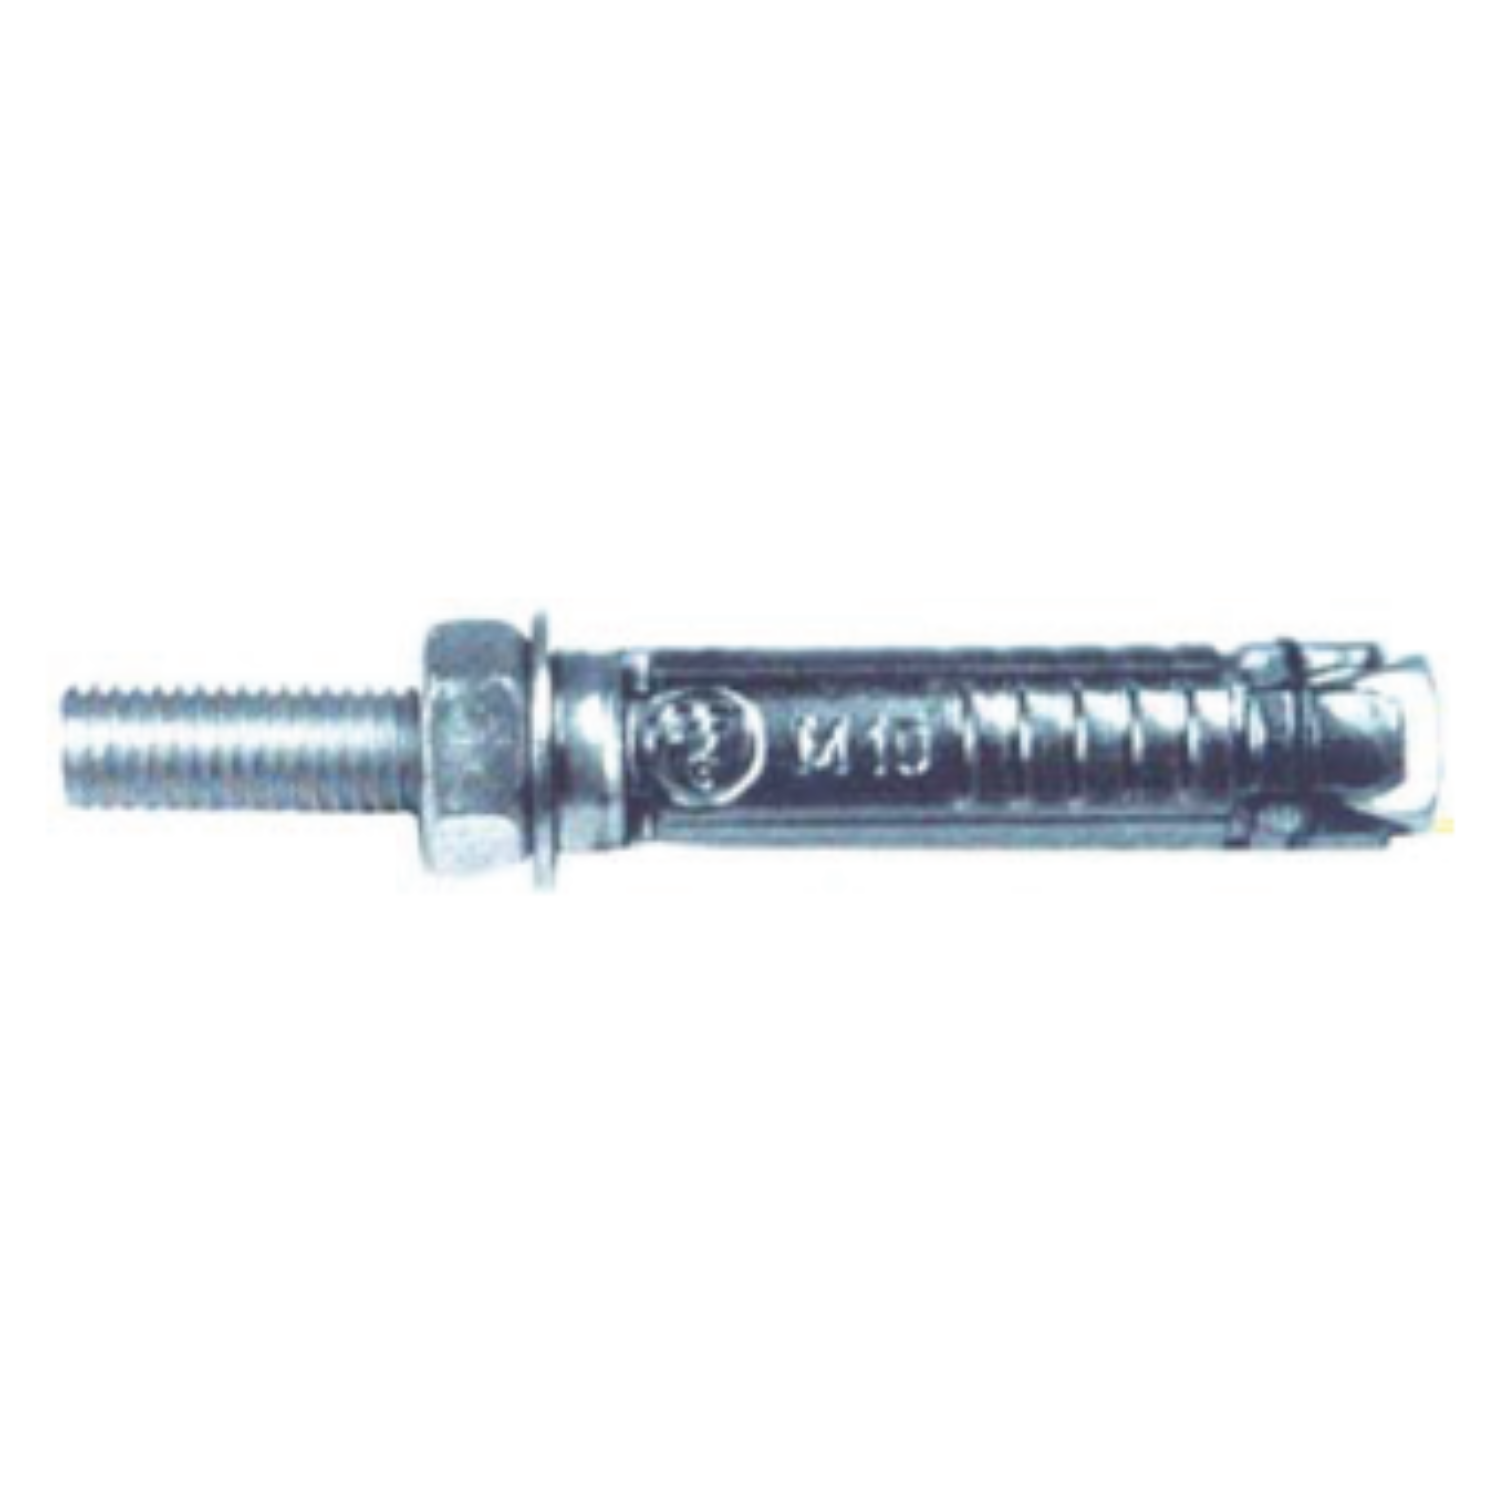 YEW AIK AD00124 Expanding Bolt Shell Type A (YEW AIK Tools) - Premium Expanding Bolt from YEW AIK - Shop now at Yew Aik.